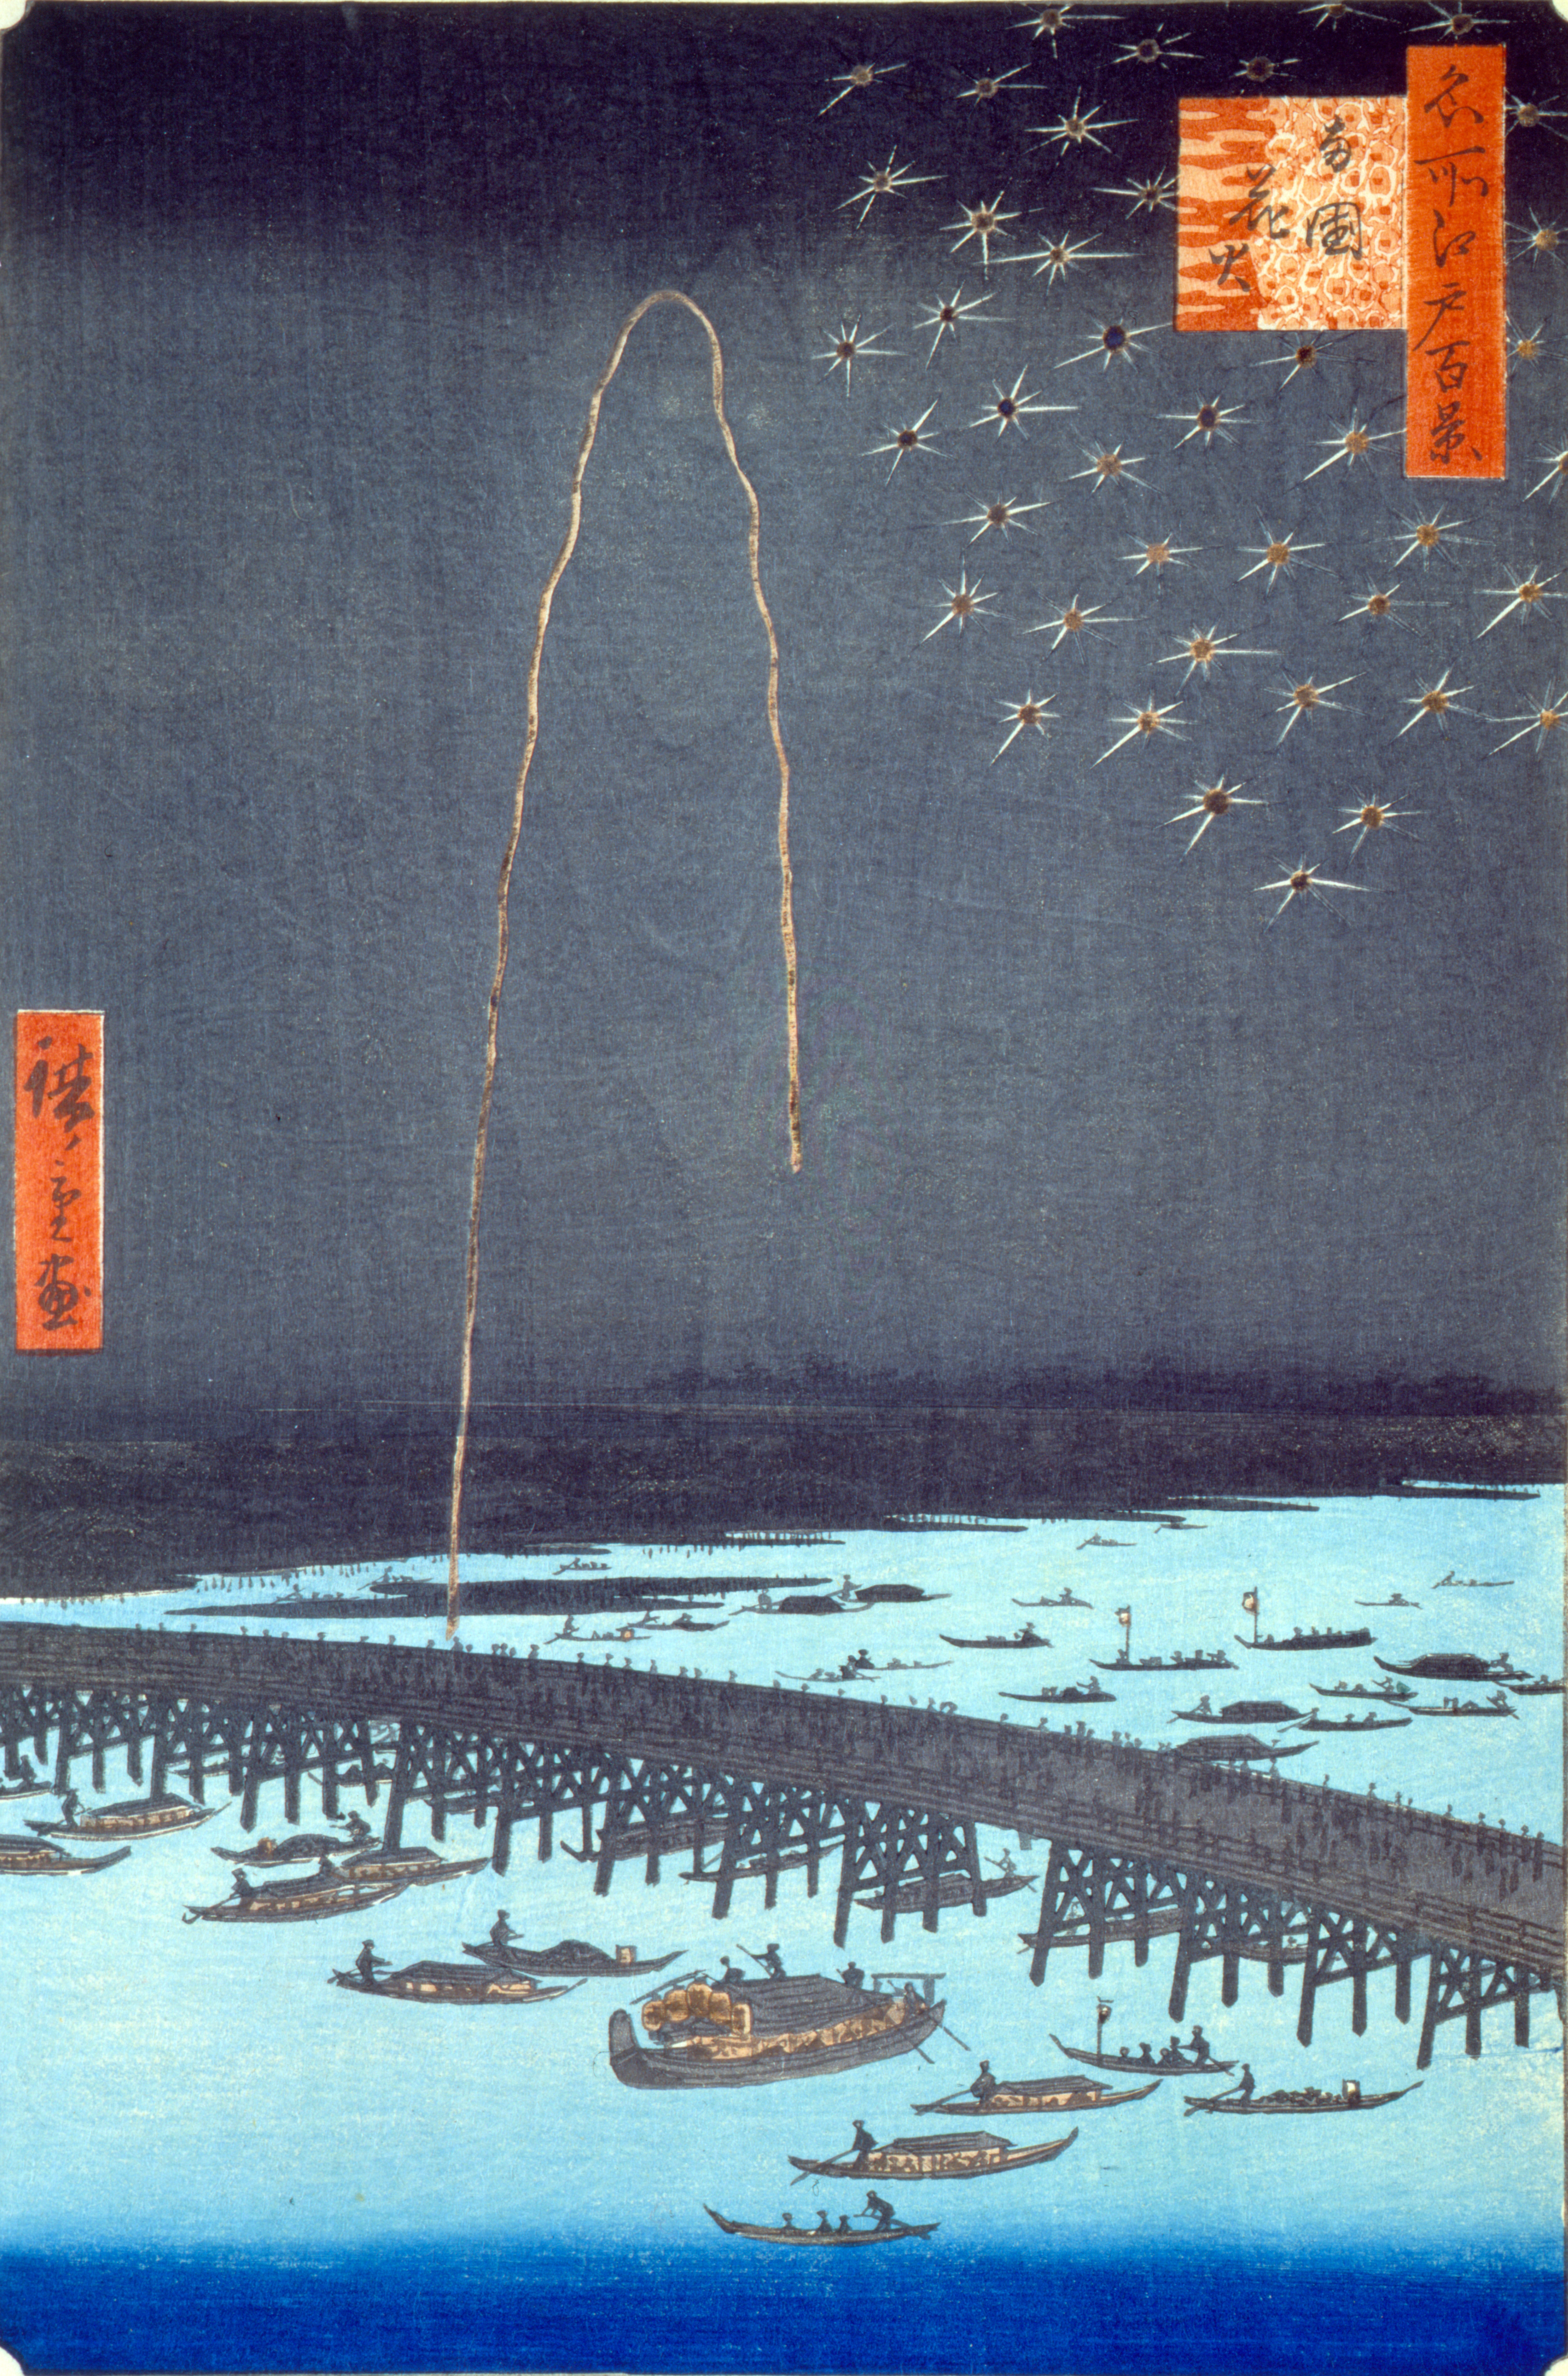 - "Fireworks at Ryo¯goku, from the series One Hundred Famous Views of Edo," 1858, by Utagawa Hiroshige, is a classic example of the artist's imaginative landscapes, which were popular both in Japan and in the West. Allen Memorial Art Museum, Oberlin College